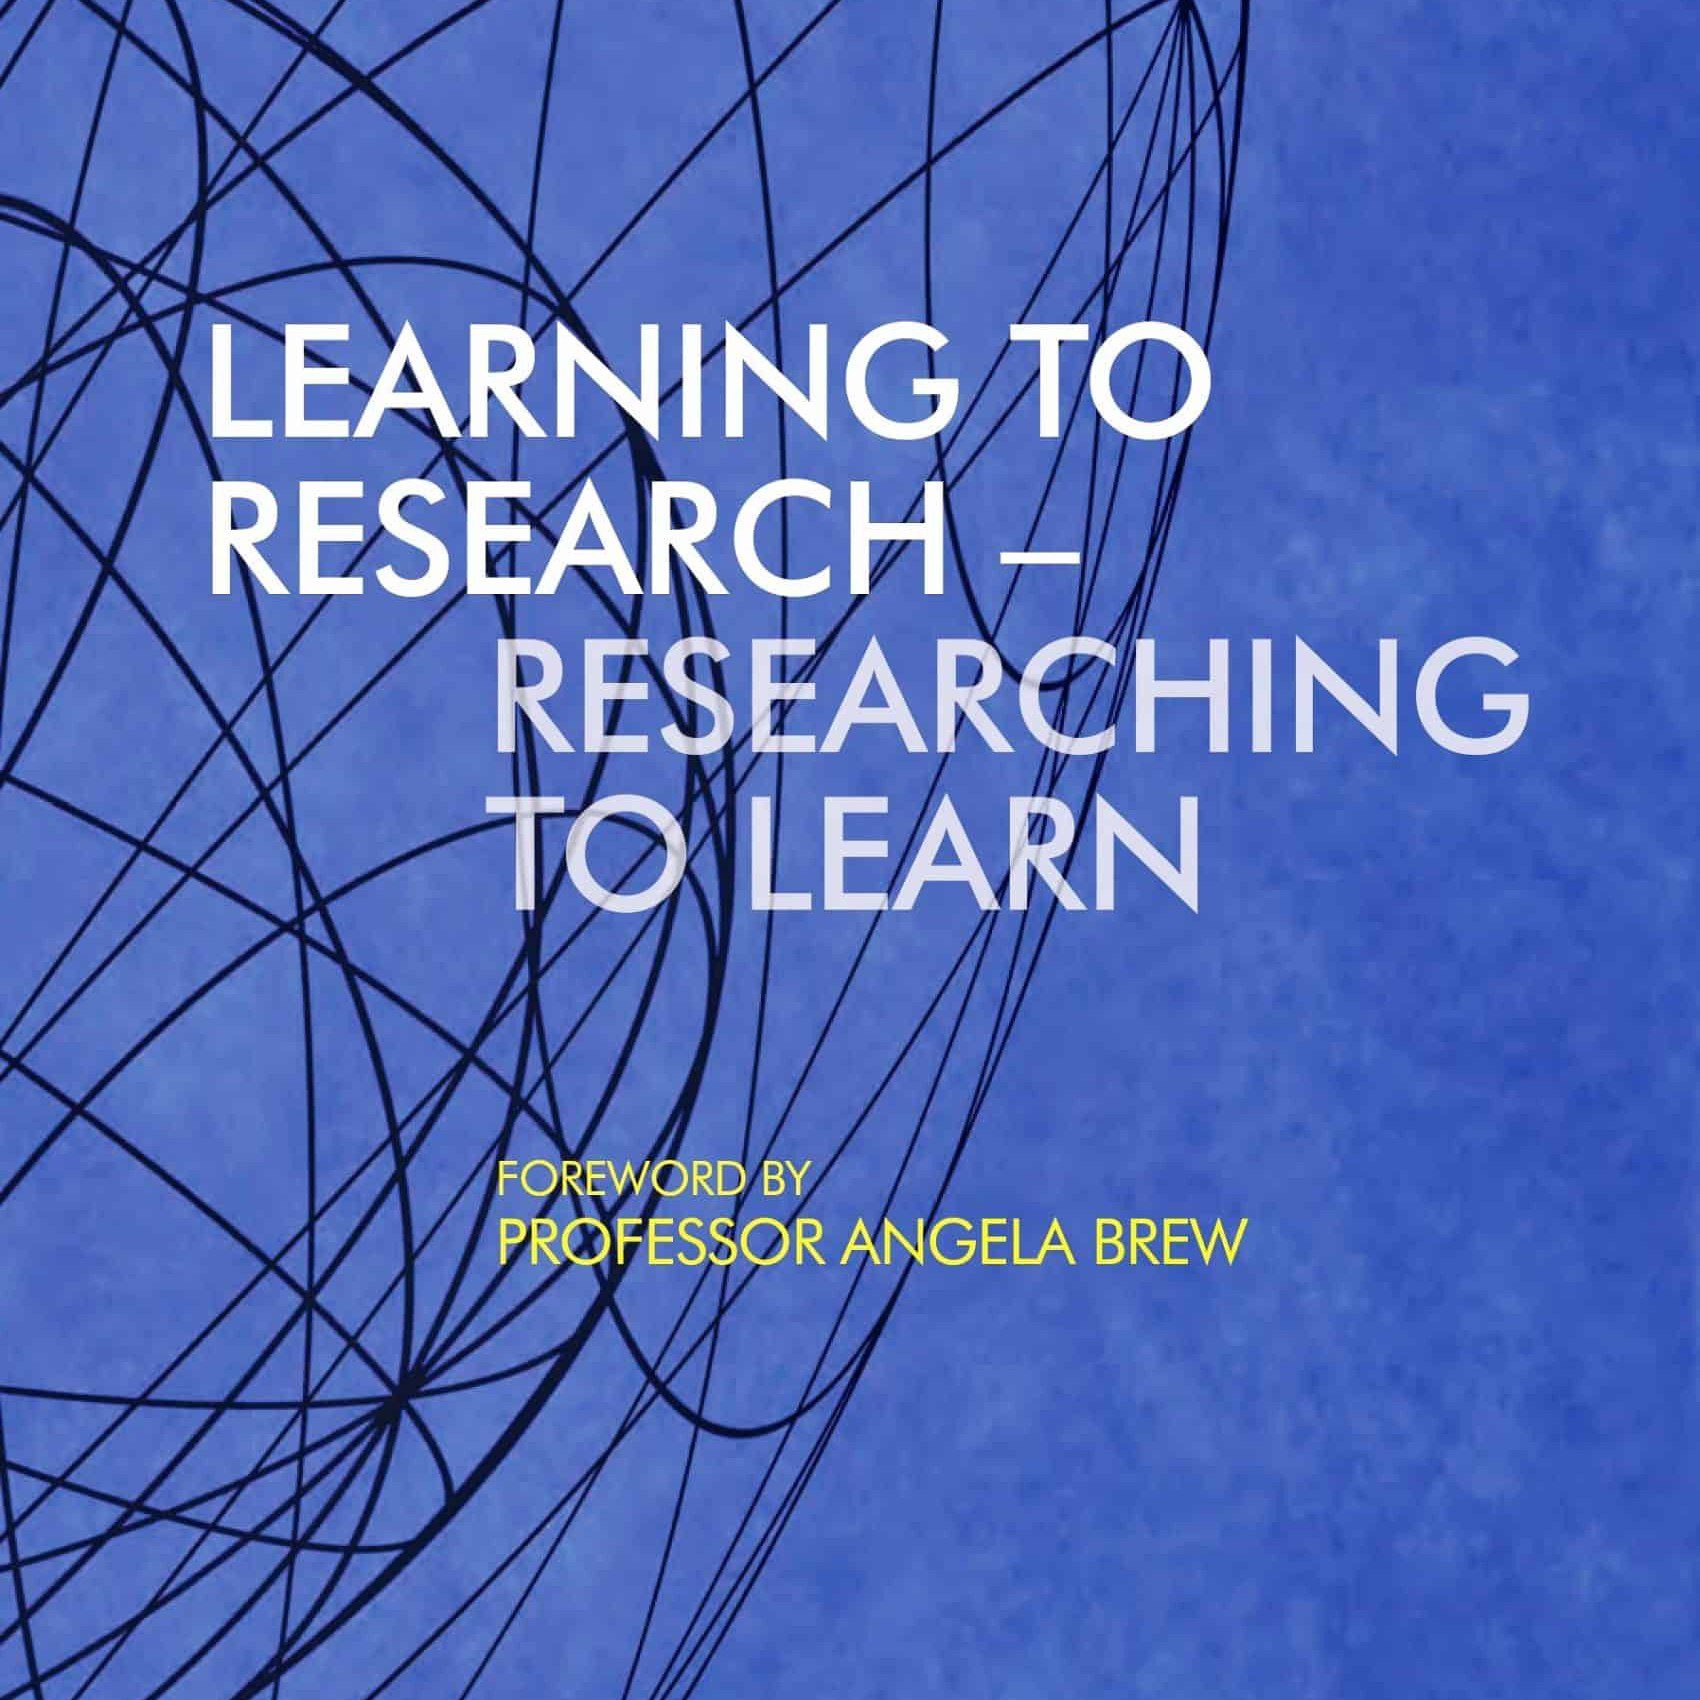 Learning to Research Researching to Learn (2015) - Cally Guerin - Paul Bartholomew - Claus Nygaard - Angela Brew - Libri Publishing Ltd - Institute for Learning in Higher Education